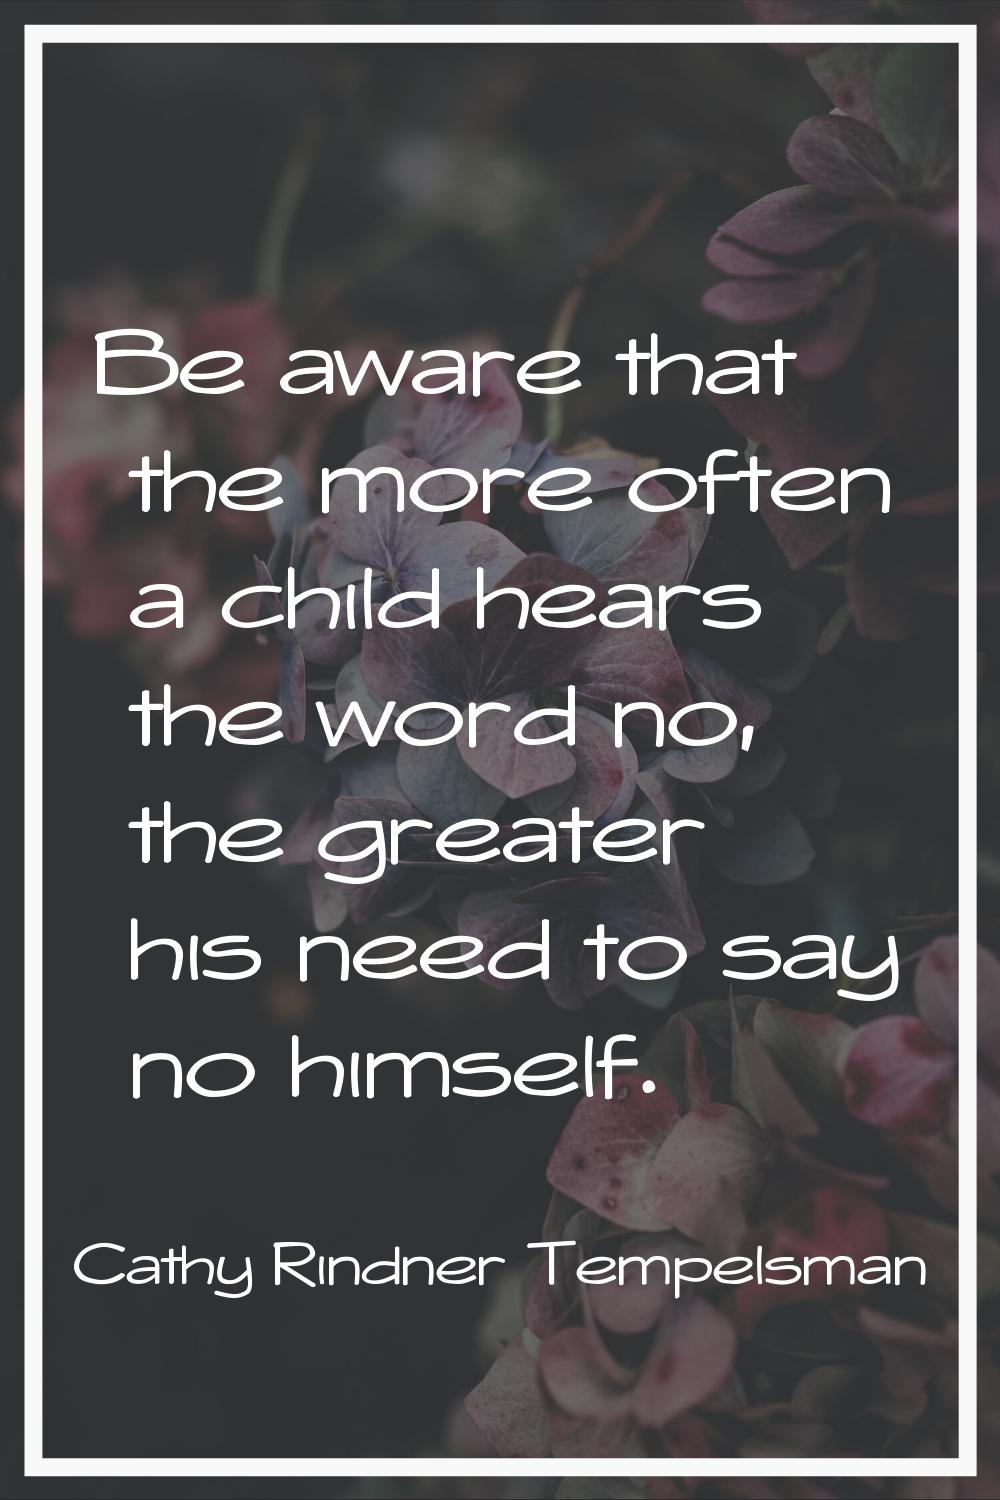 Be aware that the more often a child hears the word no, the greater his need to say no himself.